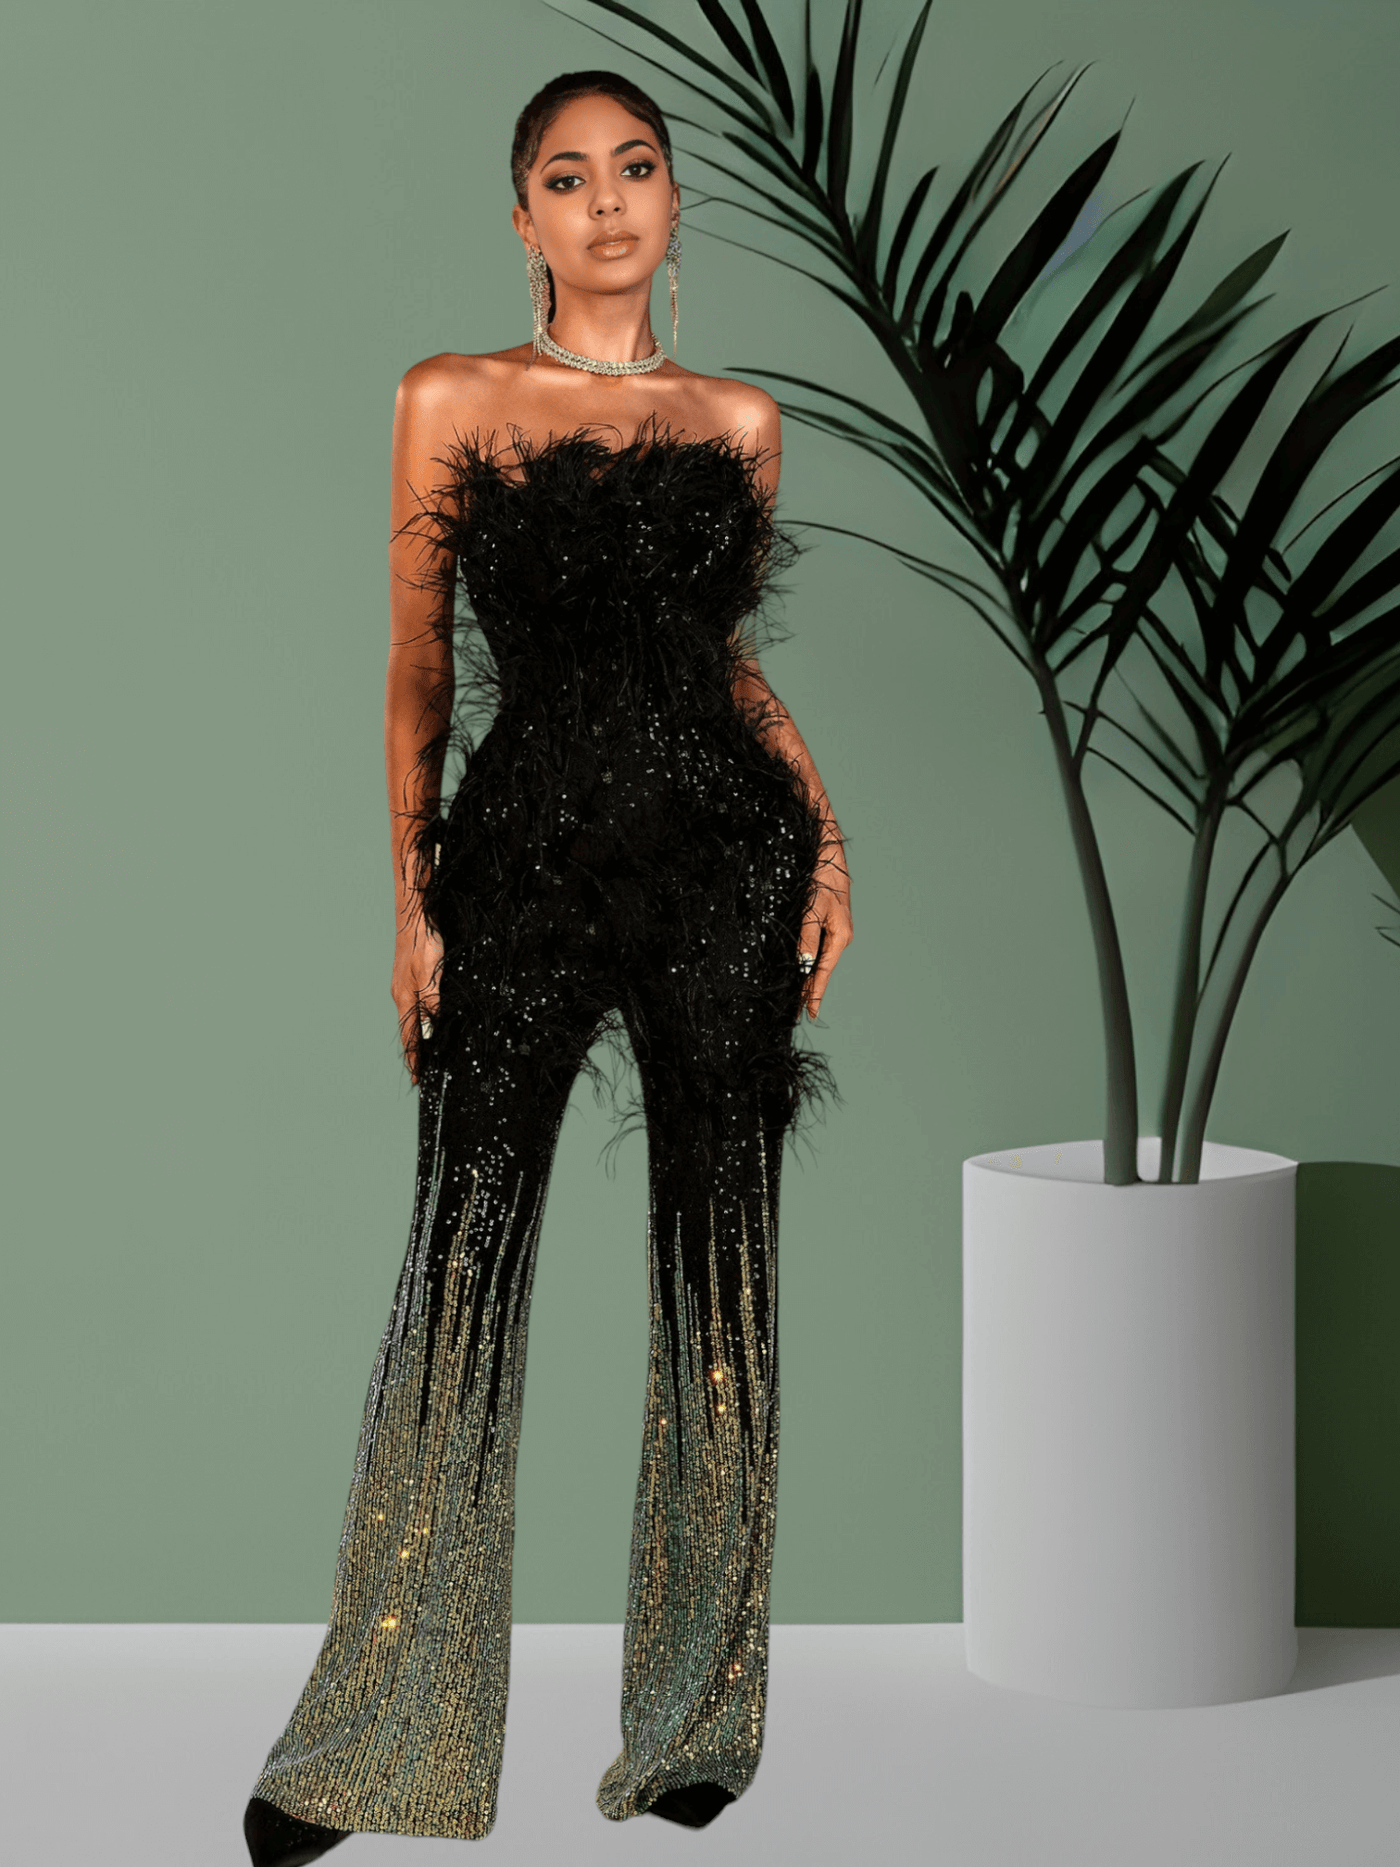 Glamorous strapless jumpsuit adorned with sequins and feathers, perfect for a stylish evening look